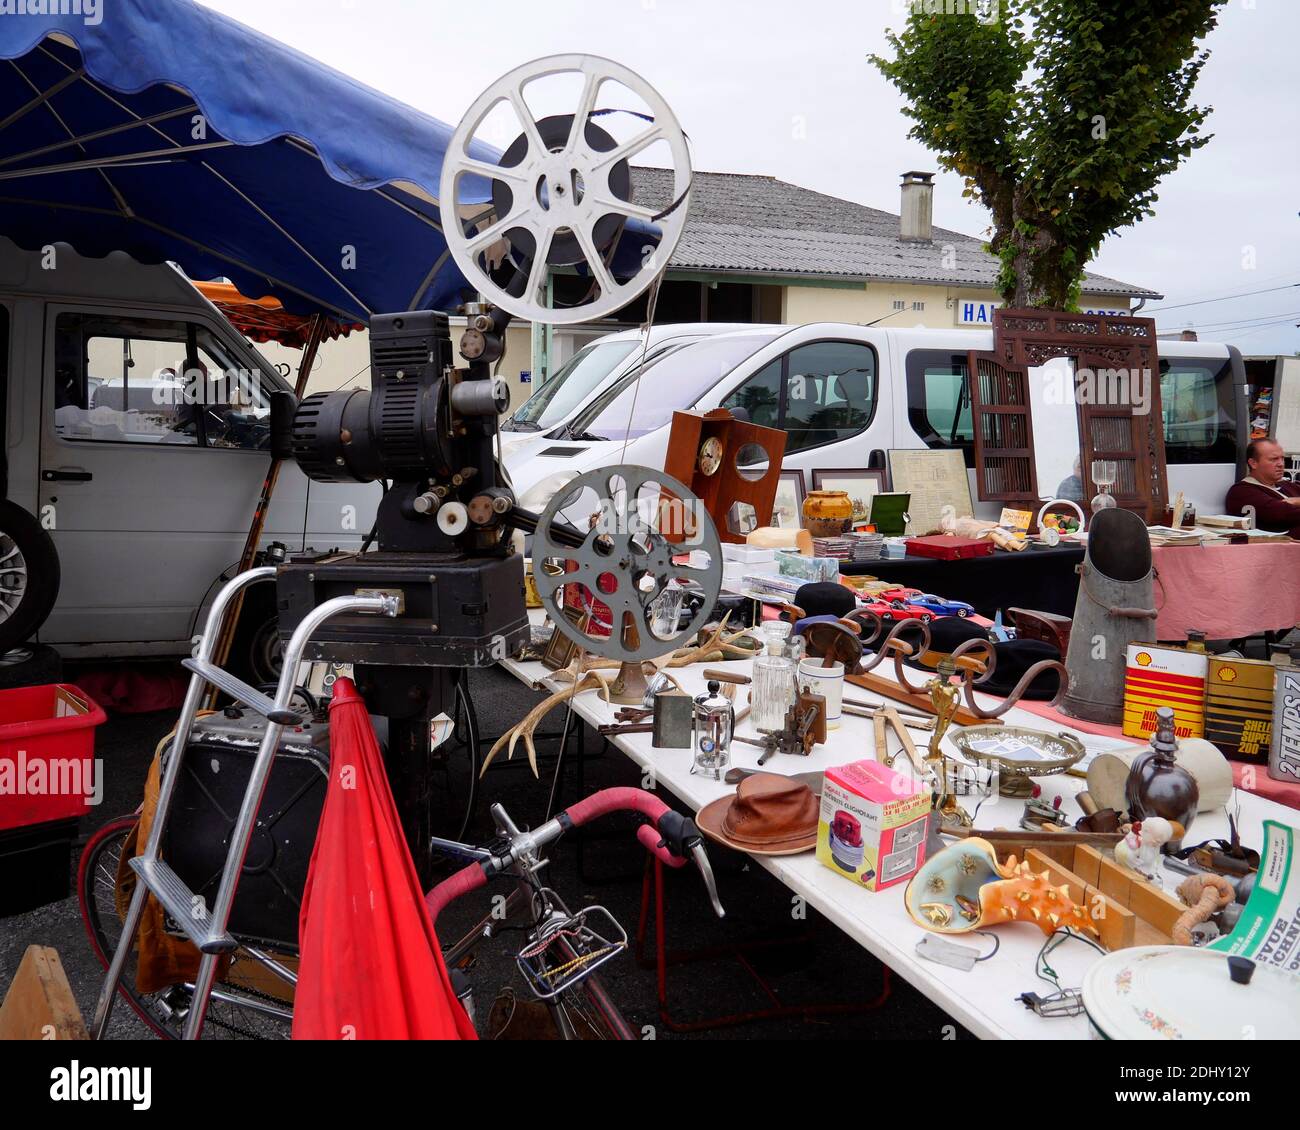 AJAXNETPHOTO. 2019. SOUMOULOU, FRANCE - BRIC-A-BRAC - 1930S - 50S 16MM ANDRE DEBRIE CINE FILM PROJECTOR (BLACK OBJECT WITH REELS LEFT CENTRE)TAKES PRIDE OF PLACE AMONG COLLECTION OF VINTAGE ARTEFACTS FOR SALE AT MARKET IN TOWN CENTRE. PHOTO:JONATHAN EASTLAND/AJAX. REF:GX8191010 810 Stock Photo